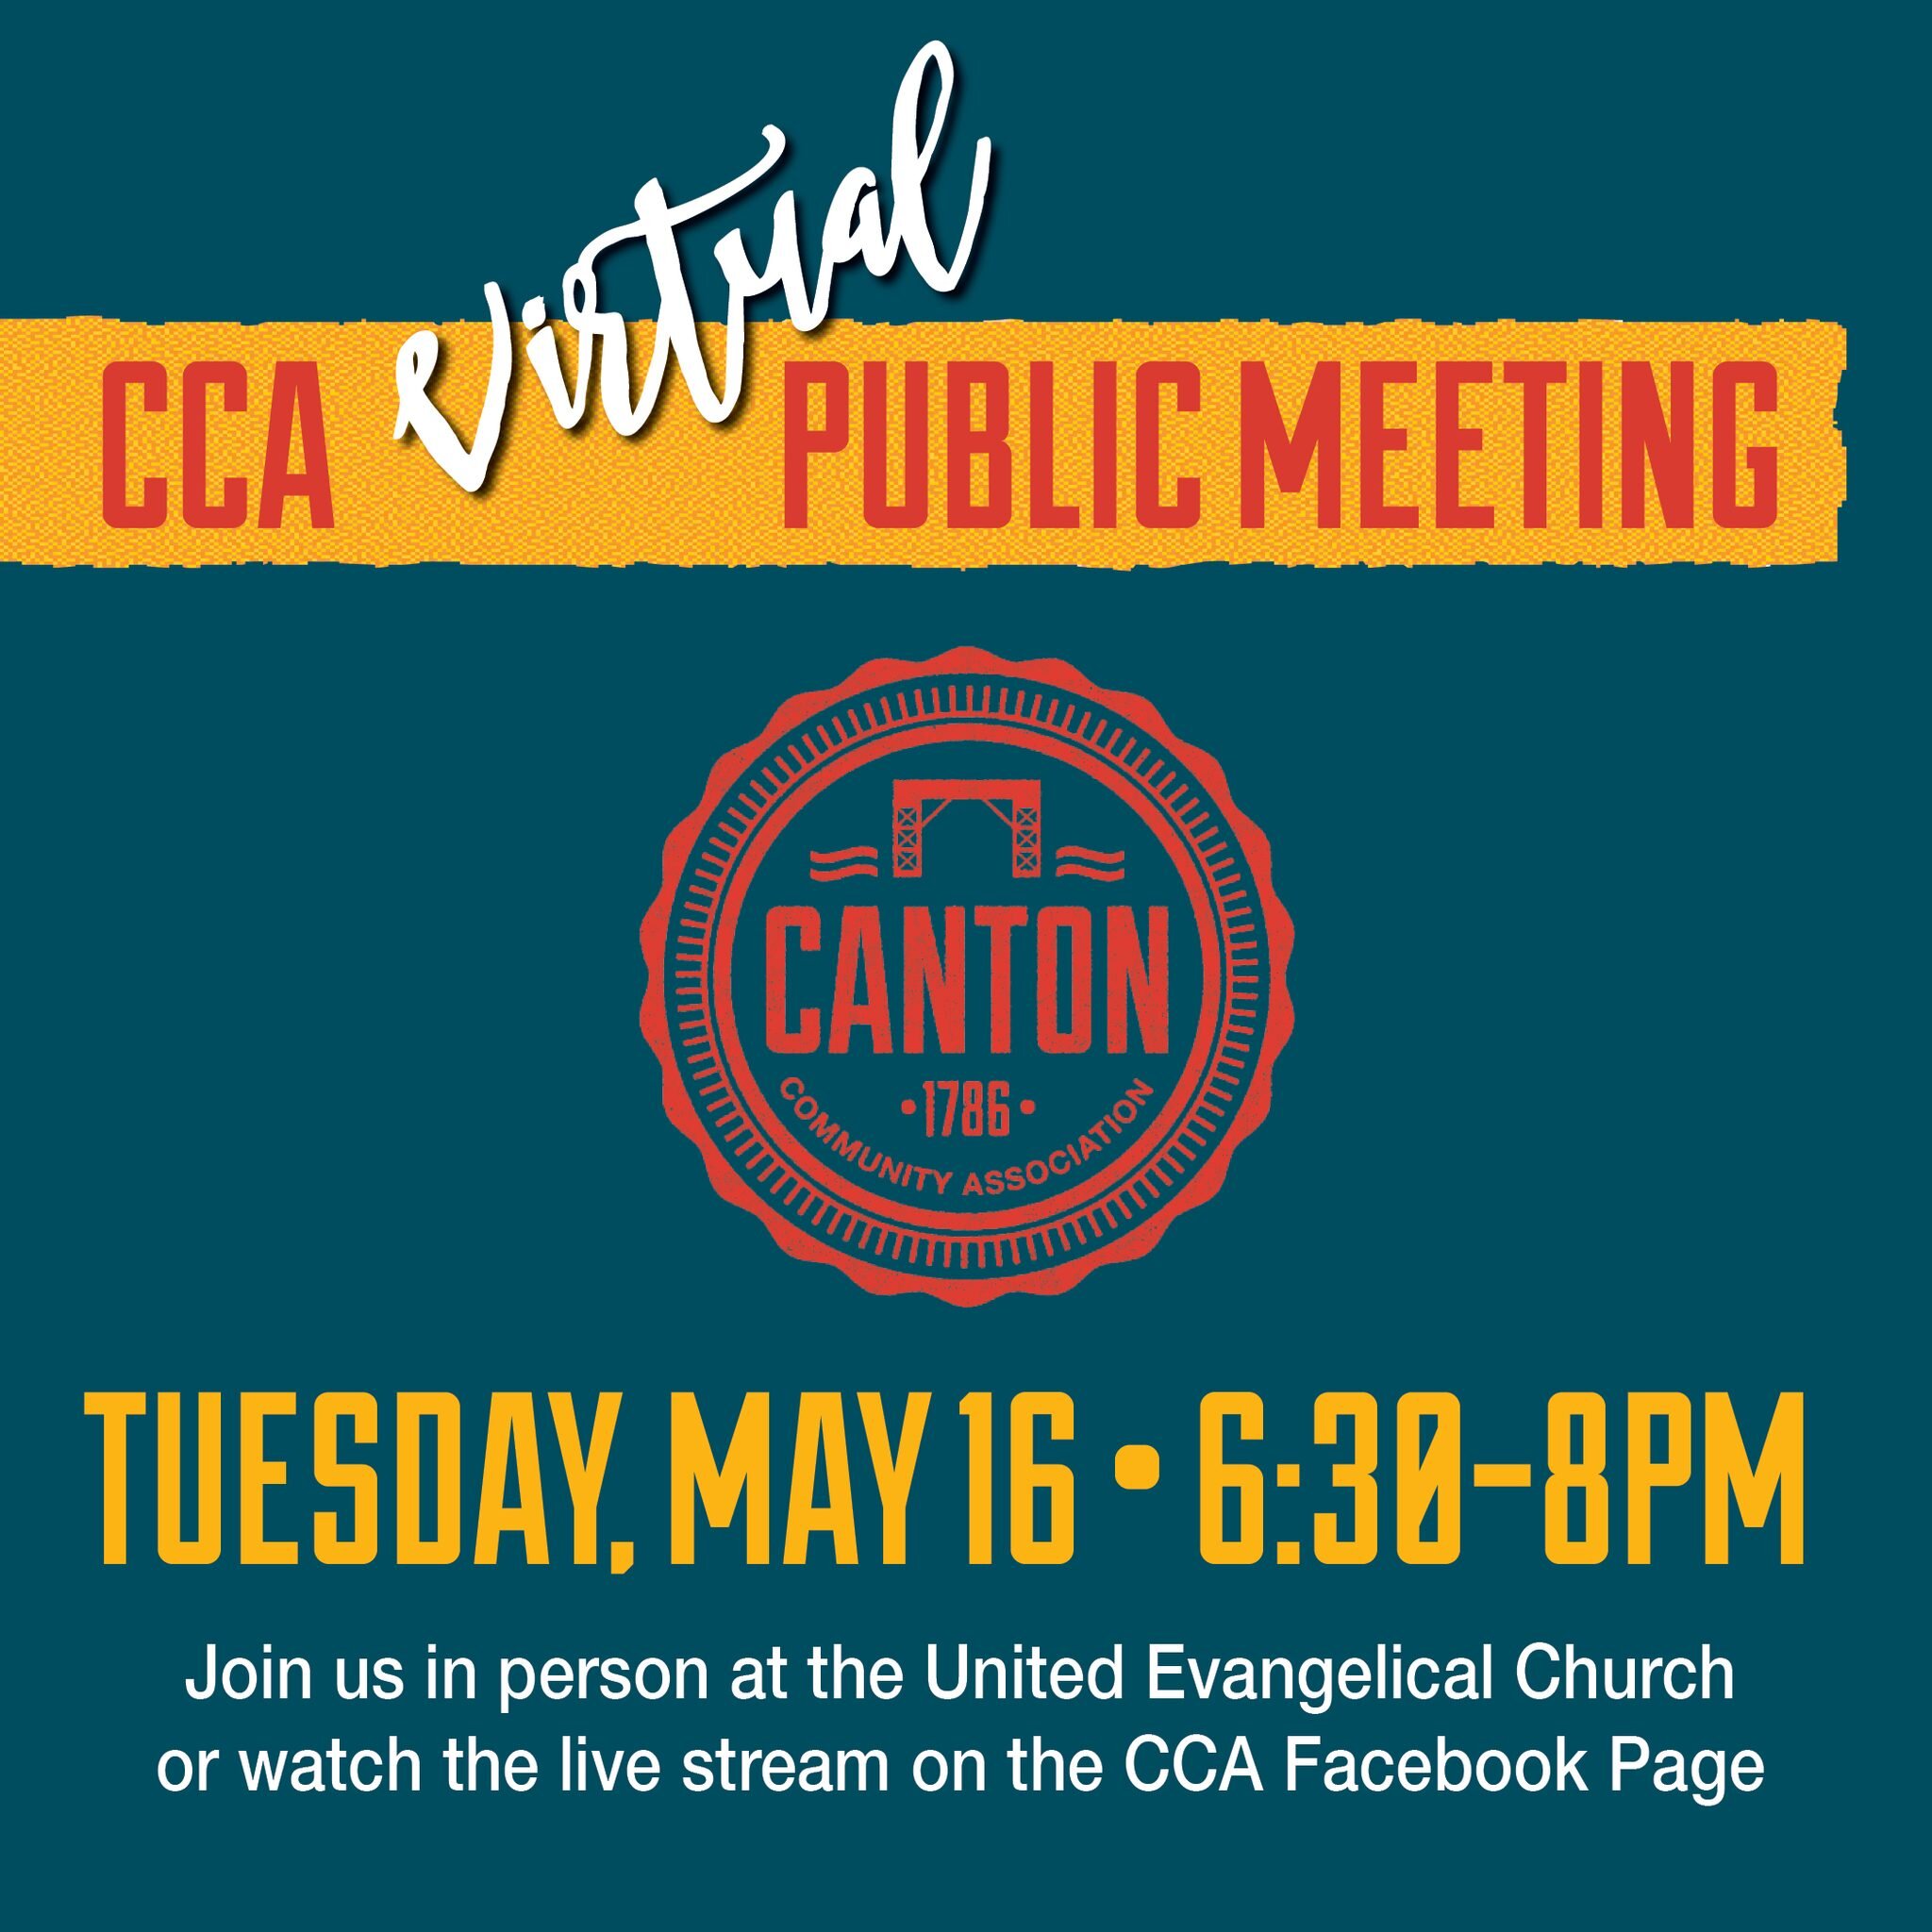 Join us TONIGHT, May 16, for the CCA PUBLIC MEETING from 6:30-8:00 PM at the
United Evangelical Church at 3200 Dillon St. (Enter from East Ave, go downstairs)
Lite Fare by @nihaobaltimore.

#GetNeighborly #CCAPublicMeeting #CCABaltimore